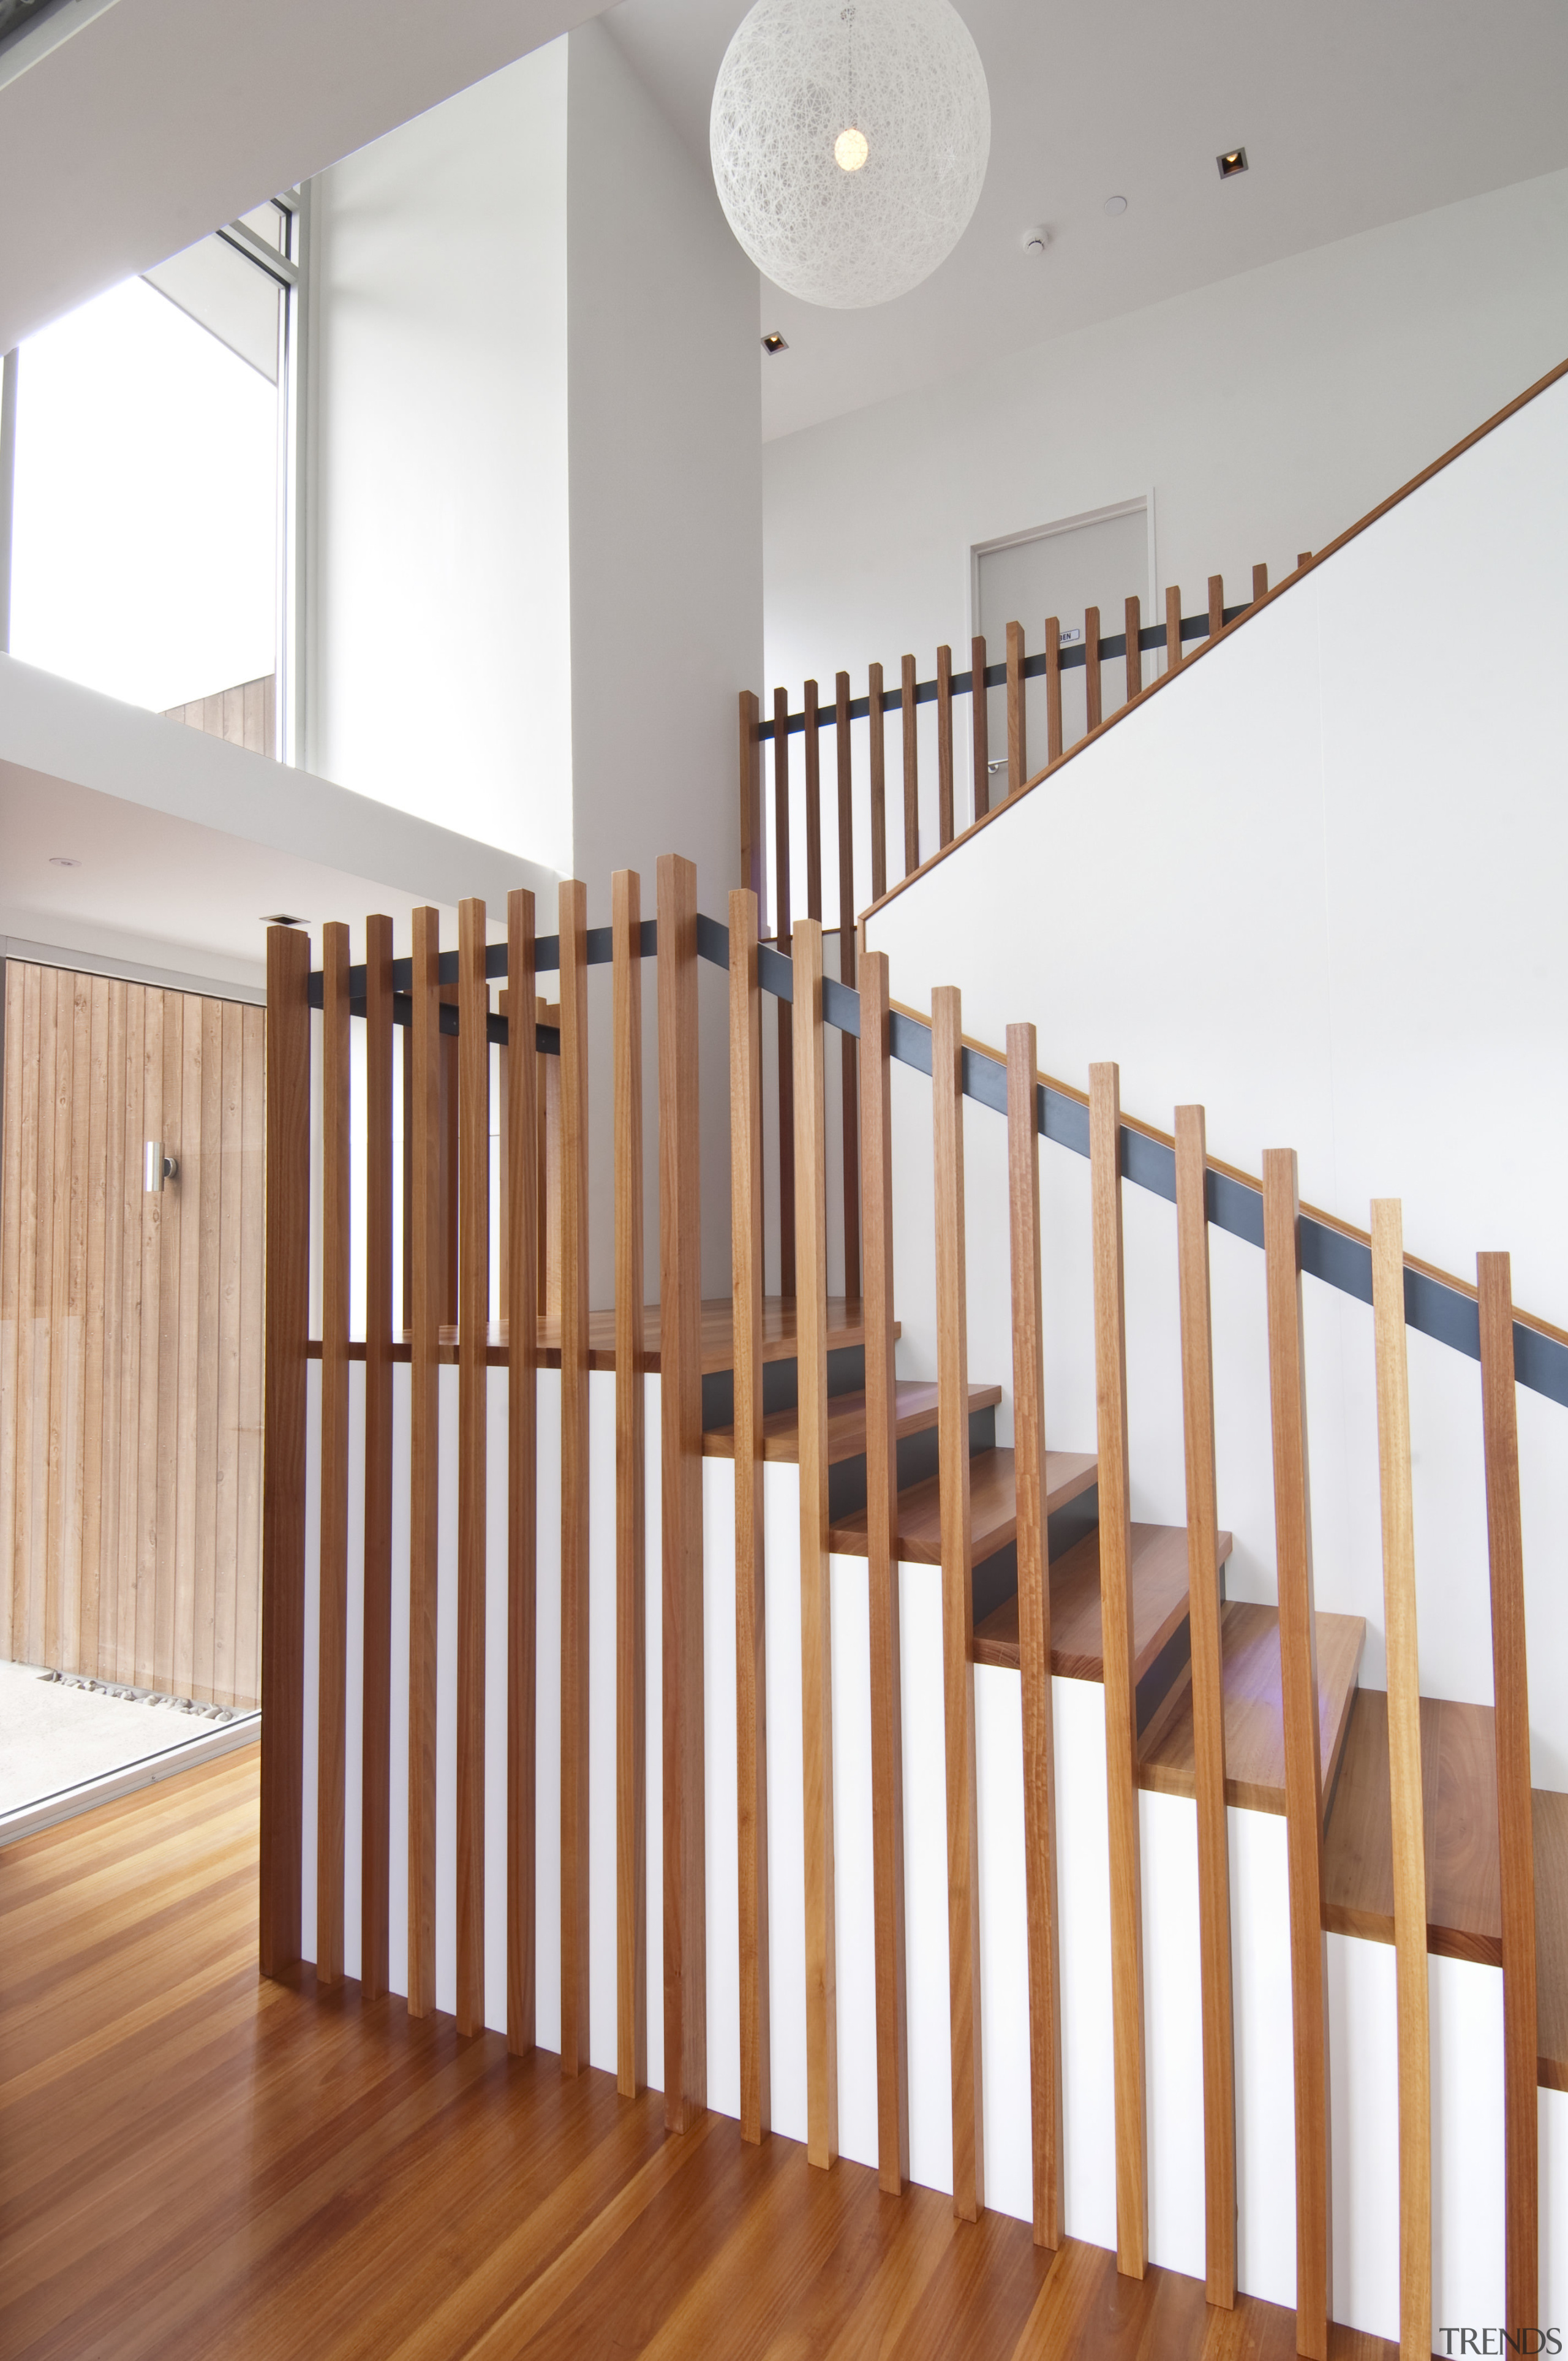 VIew of stairway in contemporary home. - VIew baluster, floor, flooring, handrail, hardwood, interior design, laminate flooring, product, stairs, wood, wood flooring, wood stain, white